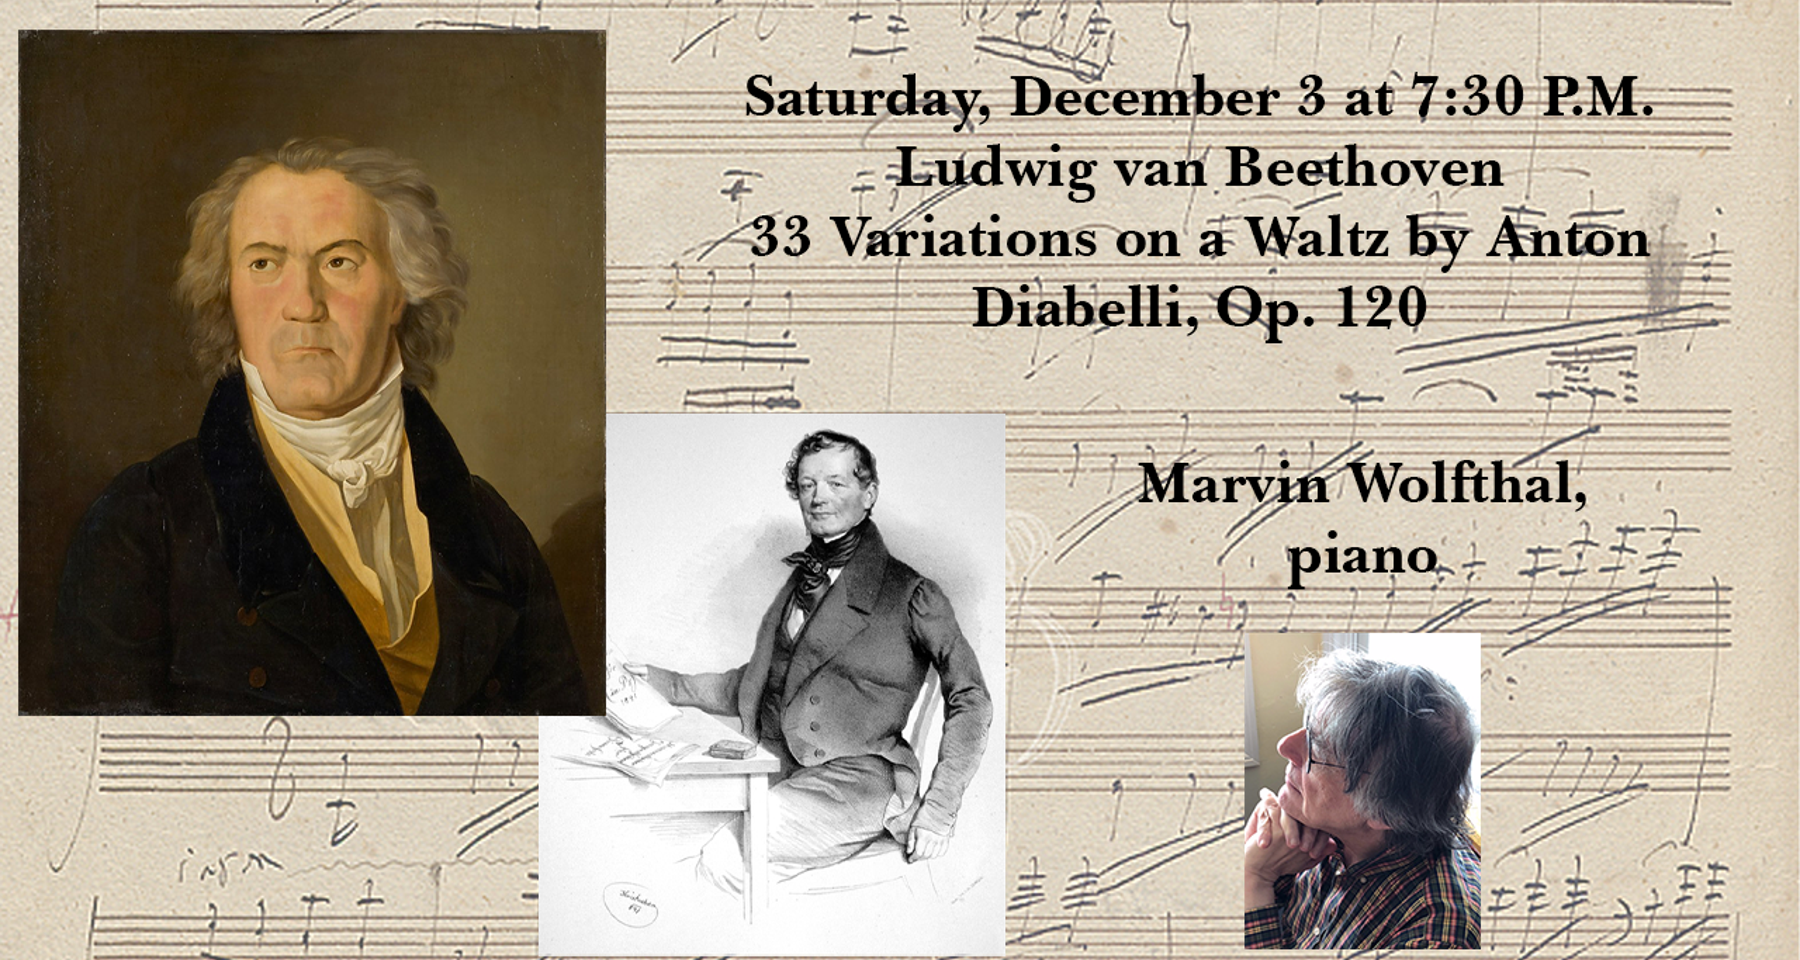 Marvin Wolfthal discusses and plays Beethoven's Diabelli Variations - Benefit Concert for the Dupuytren Foundation